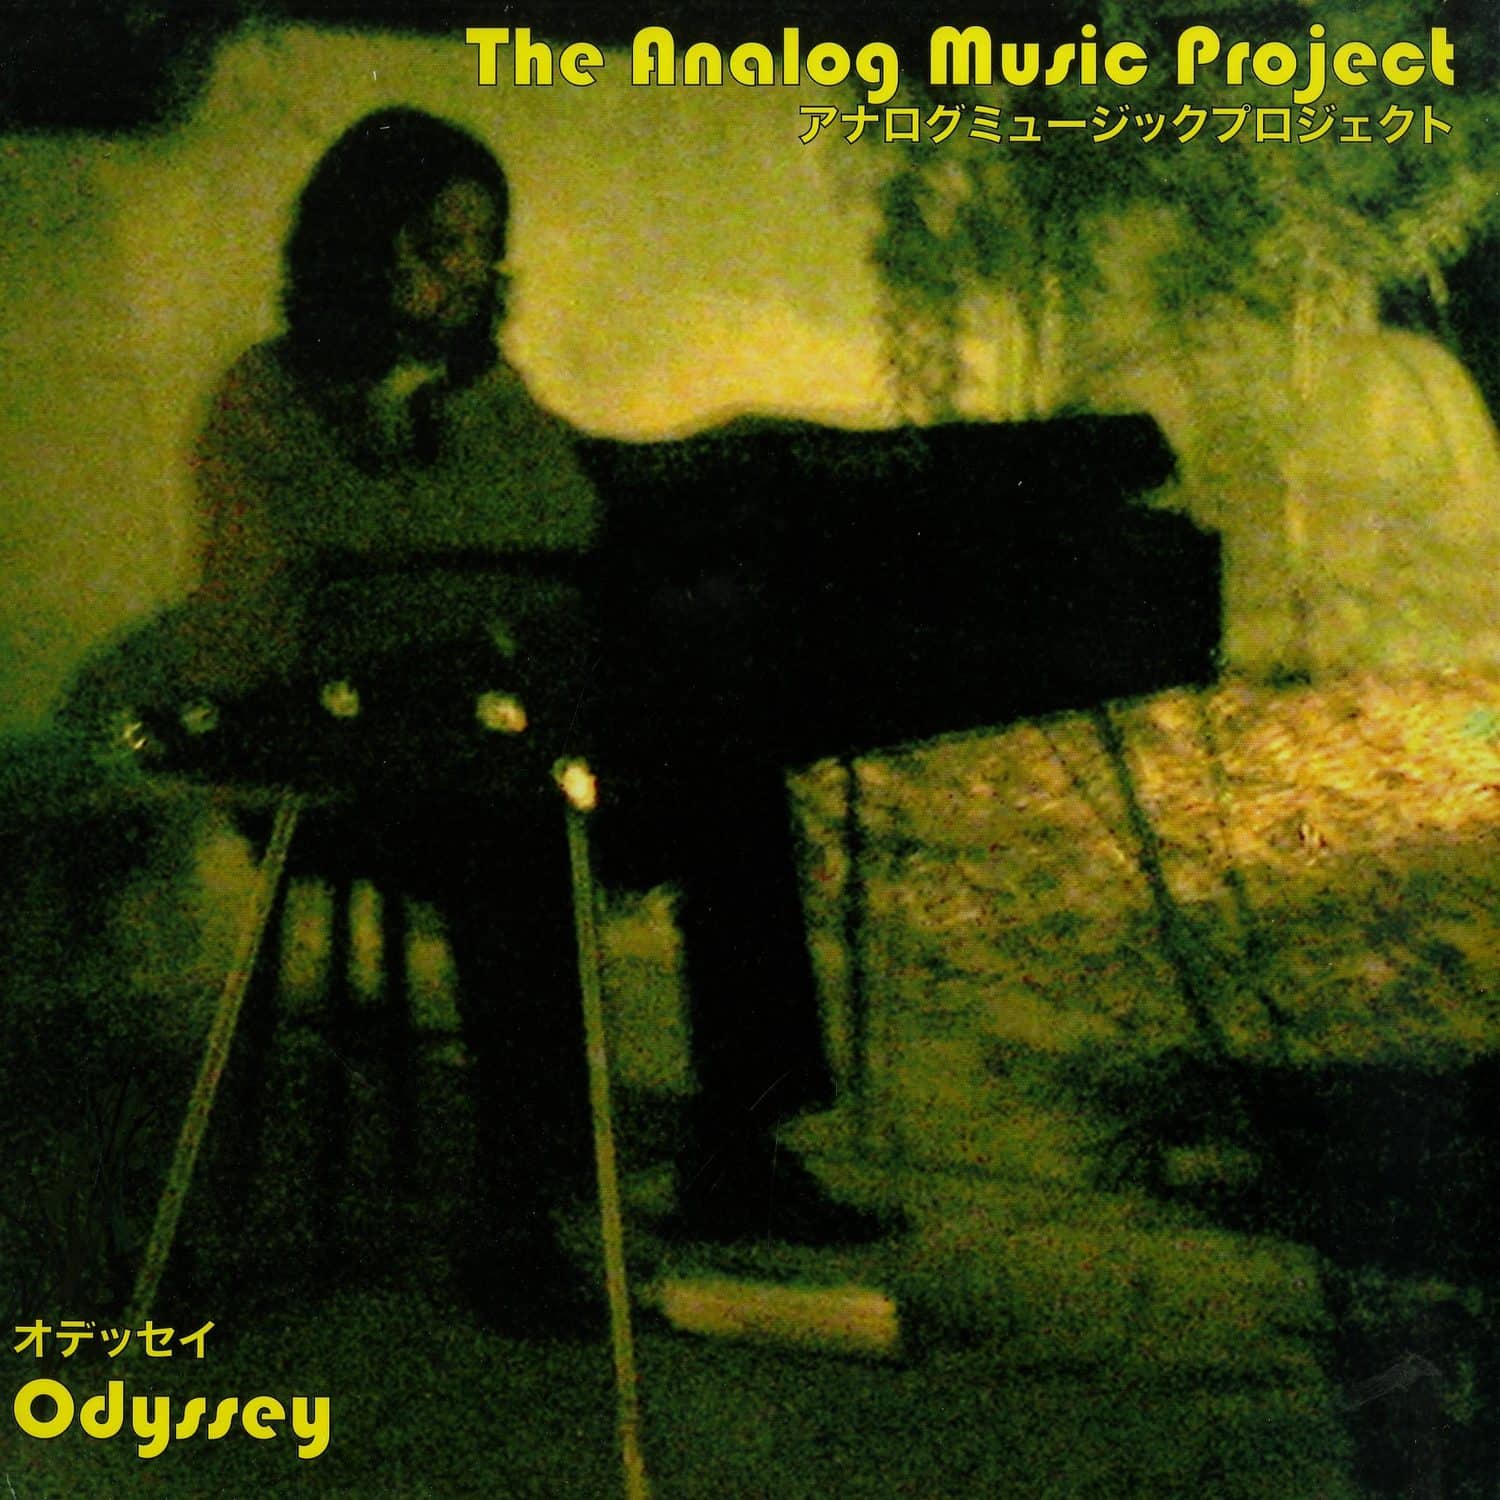 The Analog Music Project - ODYSSEY 